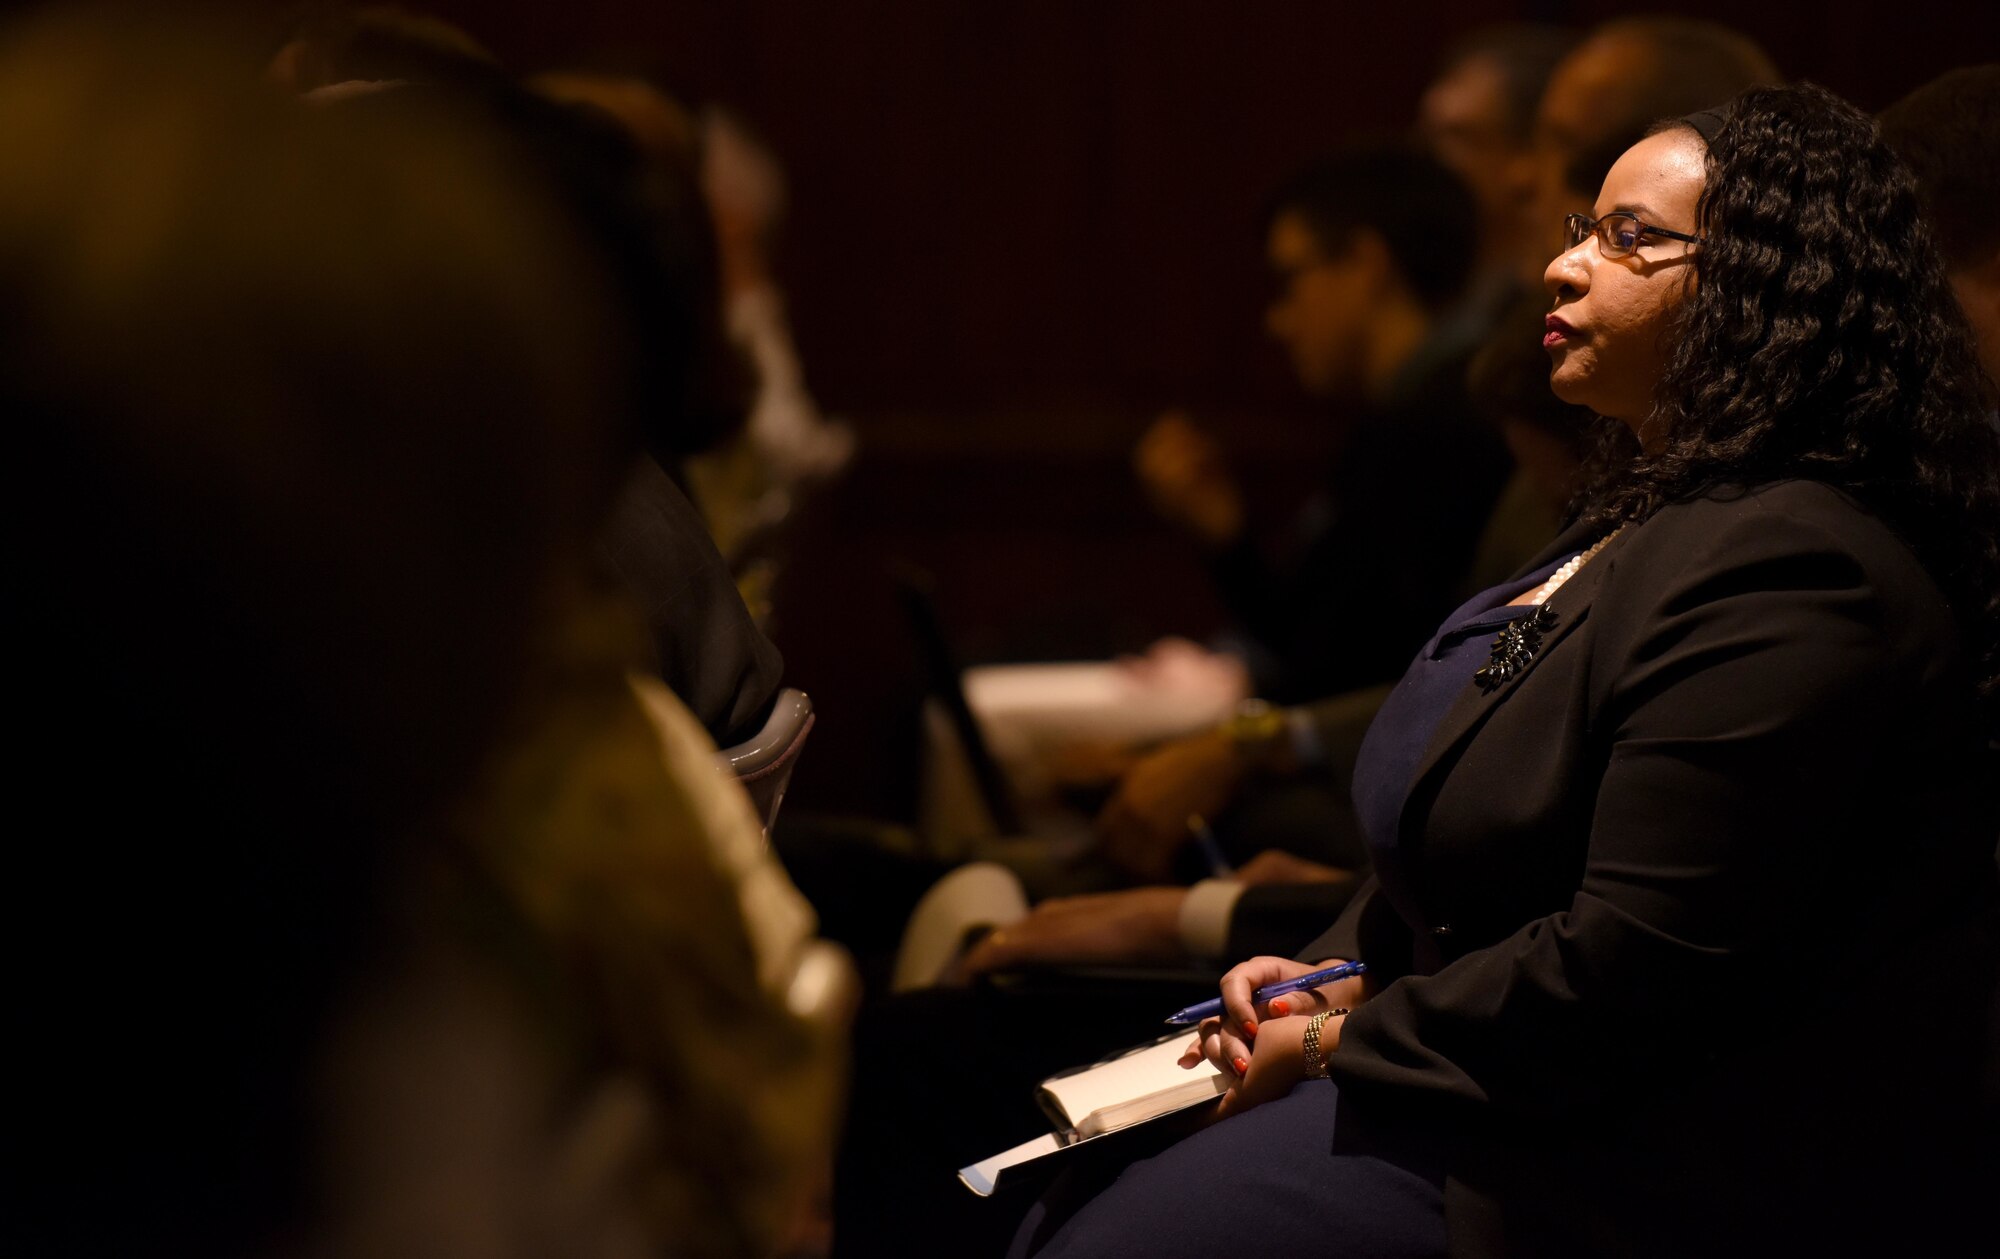 Halimah Najieb-Locke, House Armed Services Committee professional staff member, listens to small businesses pitch solutions to the Air Force during the inaugural Air Force Pitch Day in New York, March 7, 2019. The Air Force is partnering with small businesses to help further national security in air, space and cyberspace. (U.S. Air Force photo by Tech Sgt. Anthony Nelson Jr.)